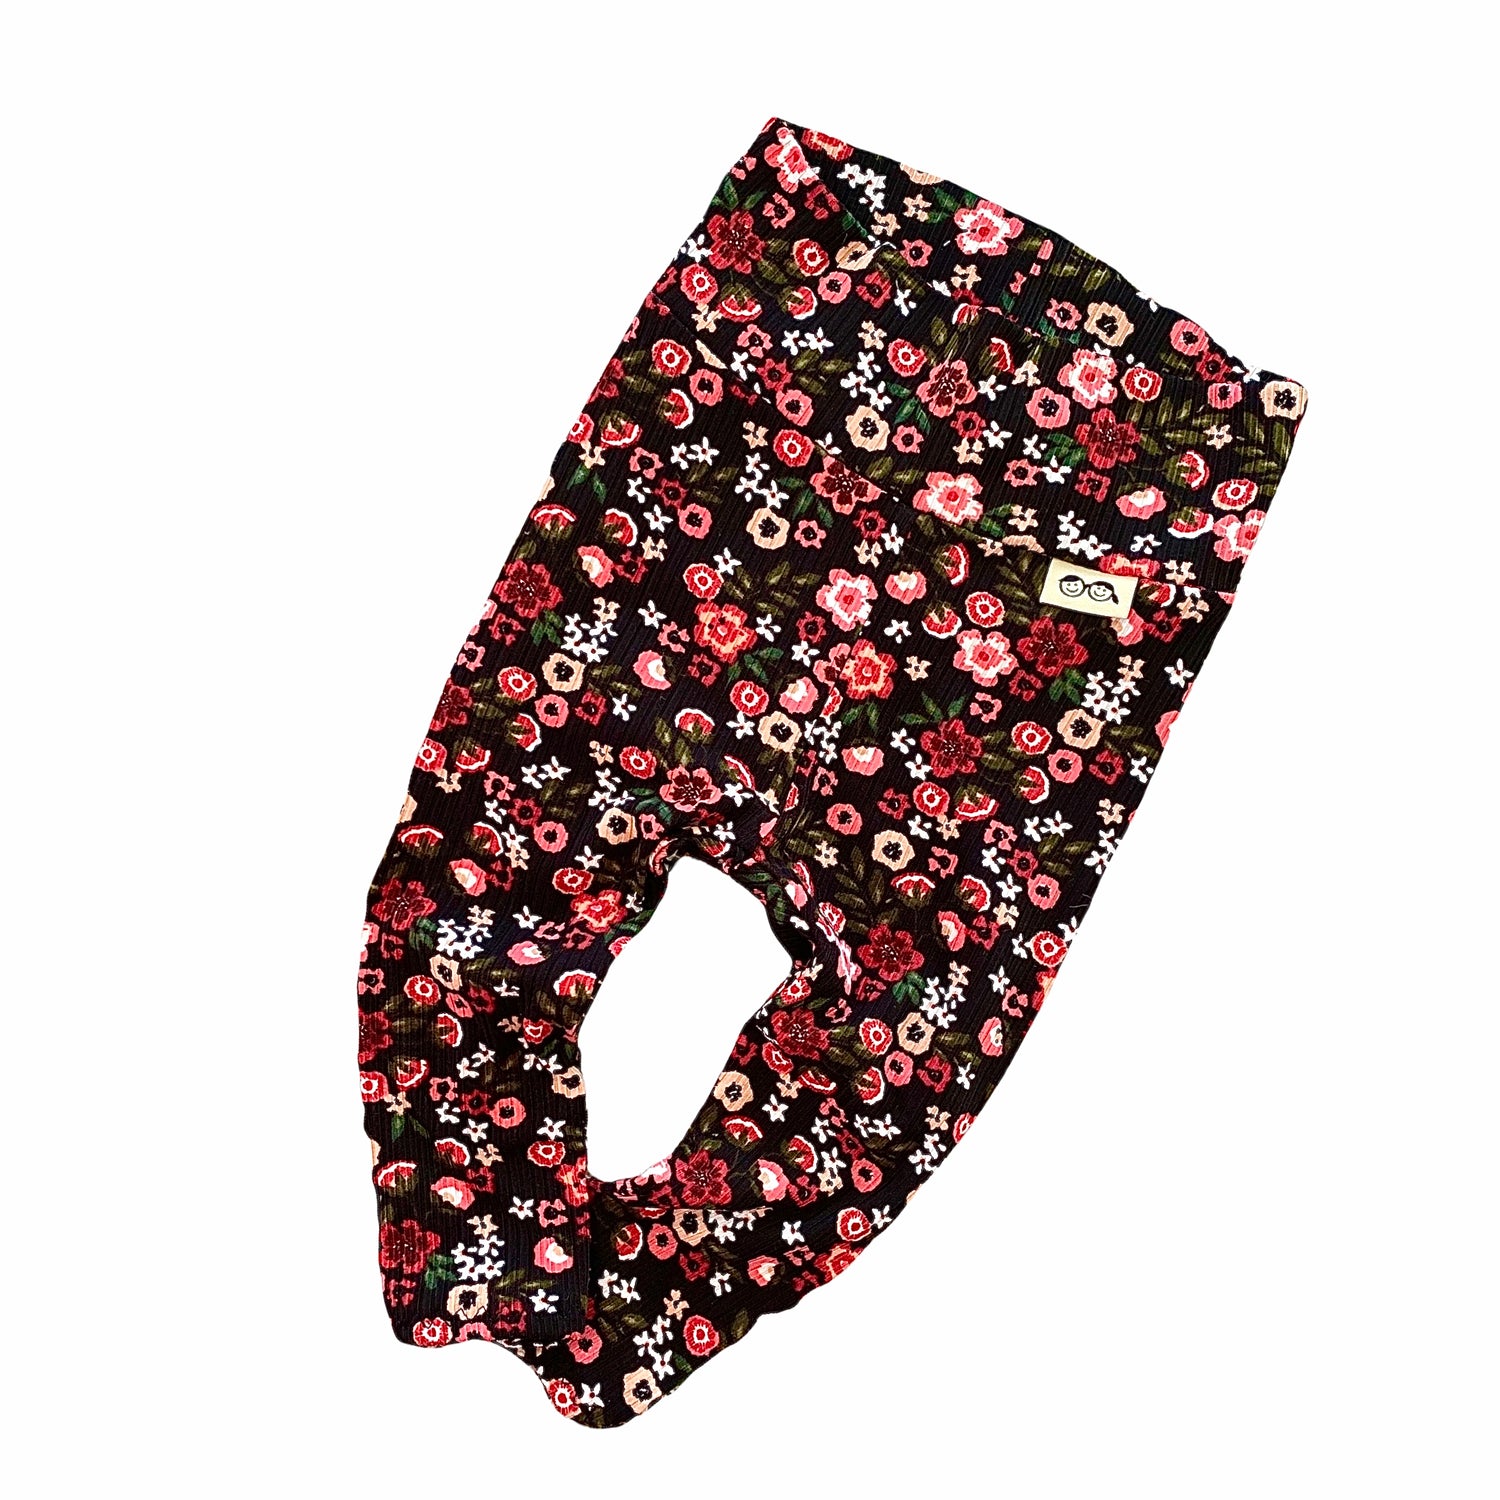 Groovy Dainty Florals on Black Rib Leggings and/or Headbands